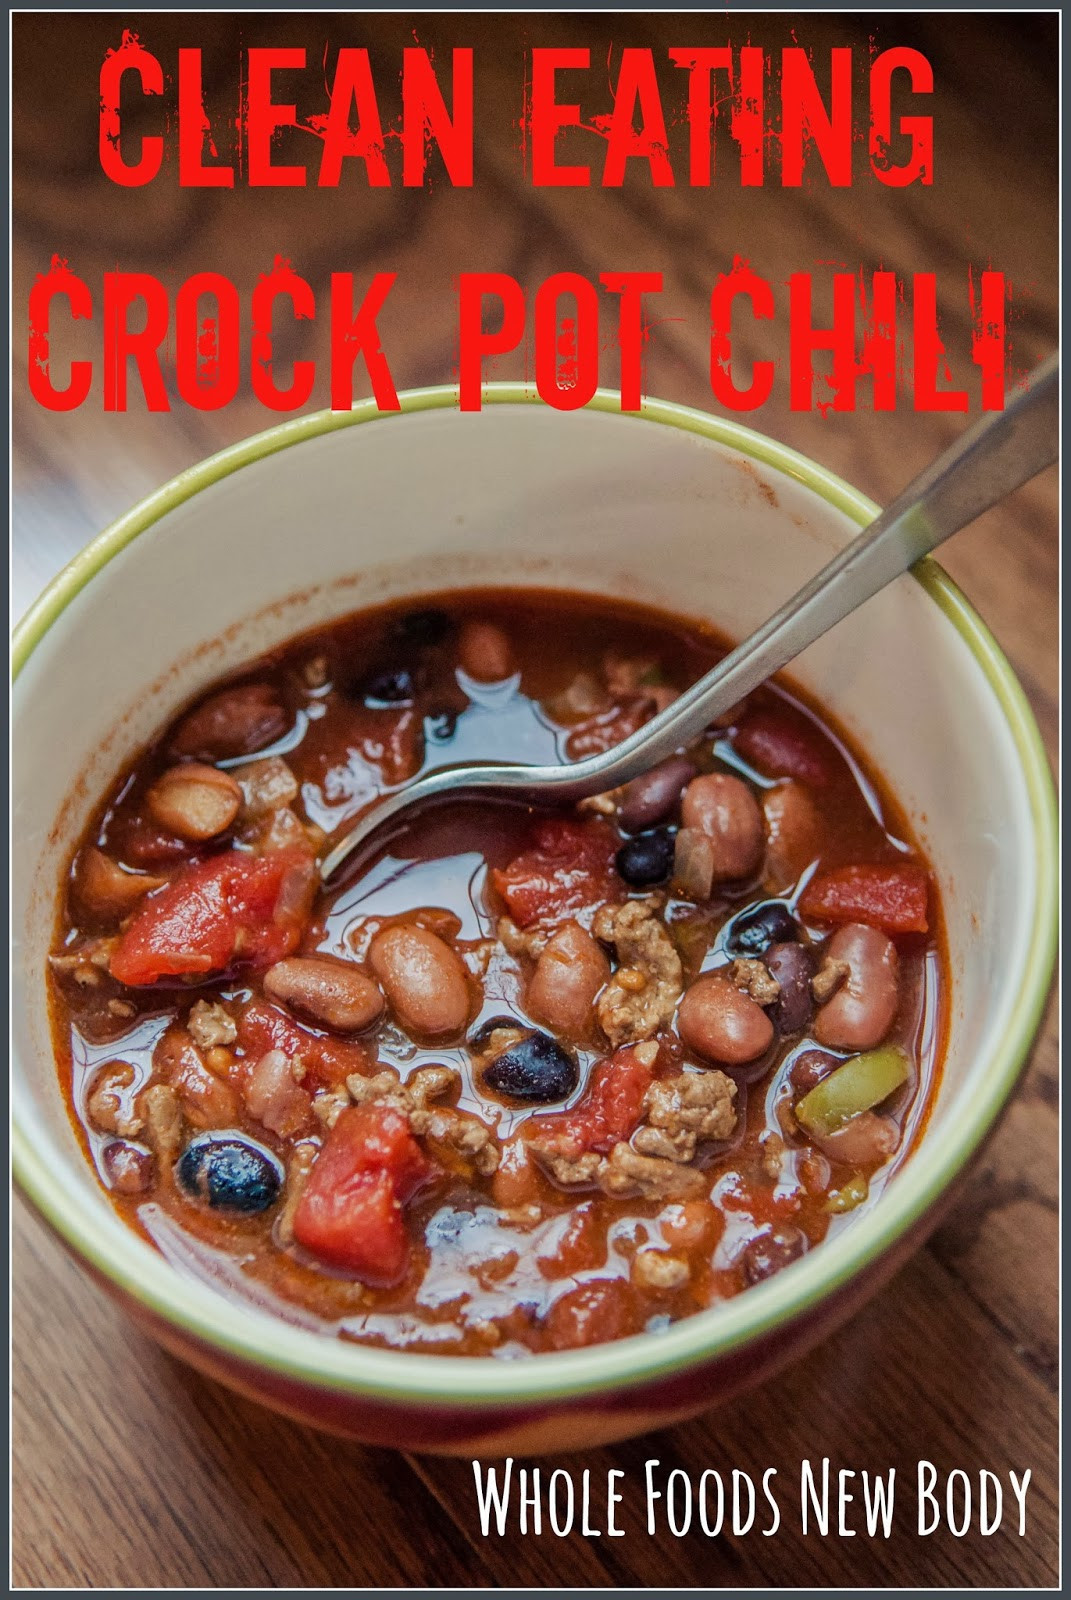 Clean Eating Crock Pot Recipes
 Whole Foods New Body Clean Eating Crock Pot Chili